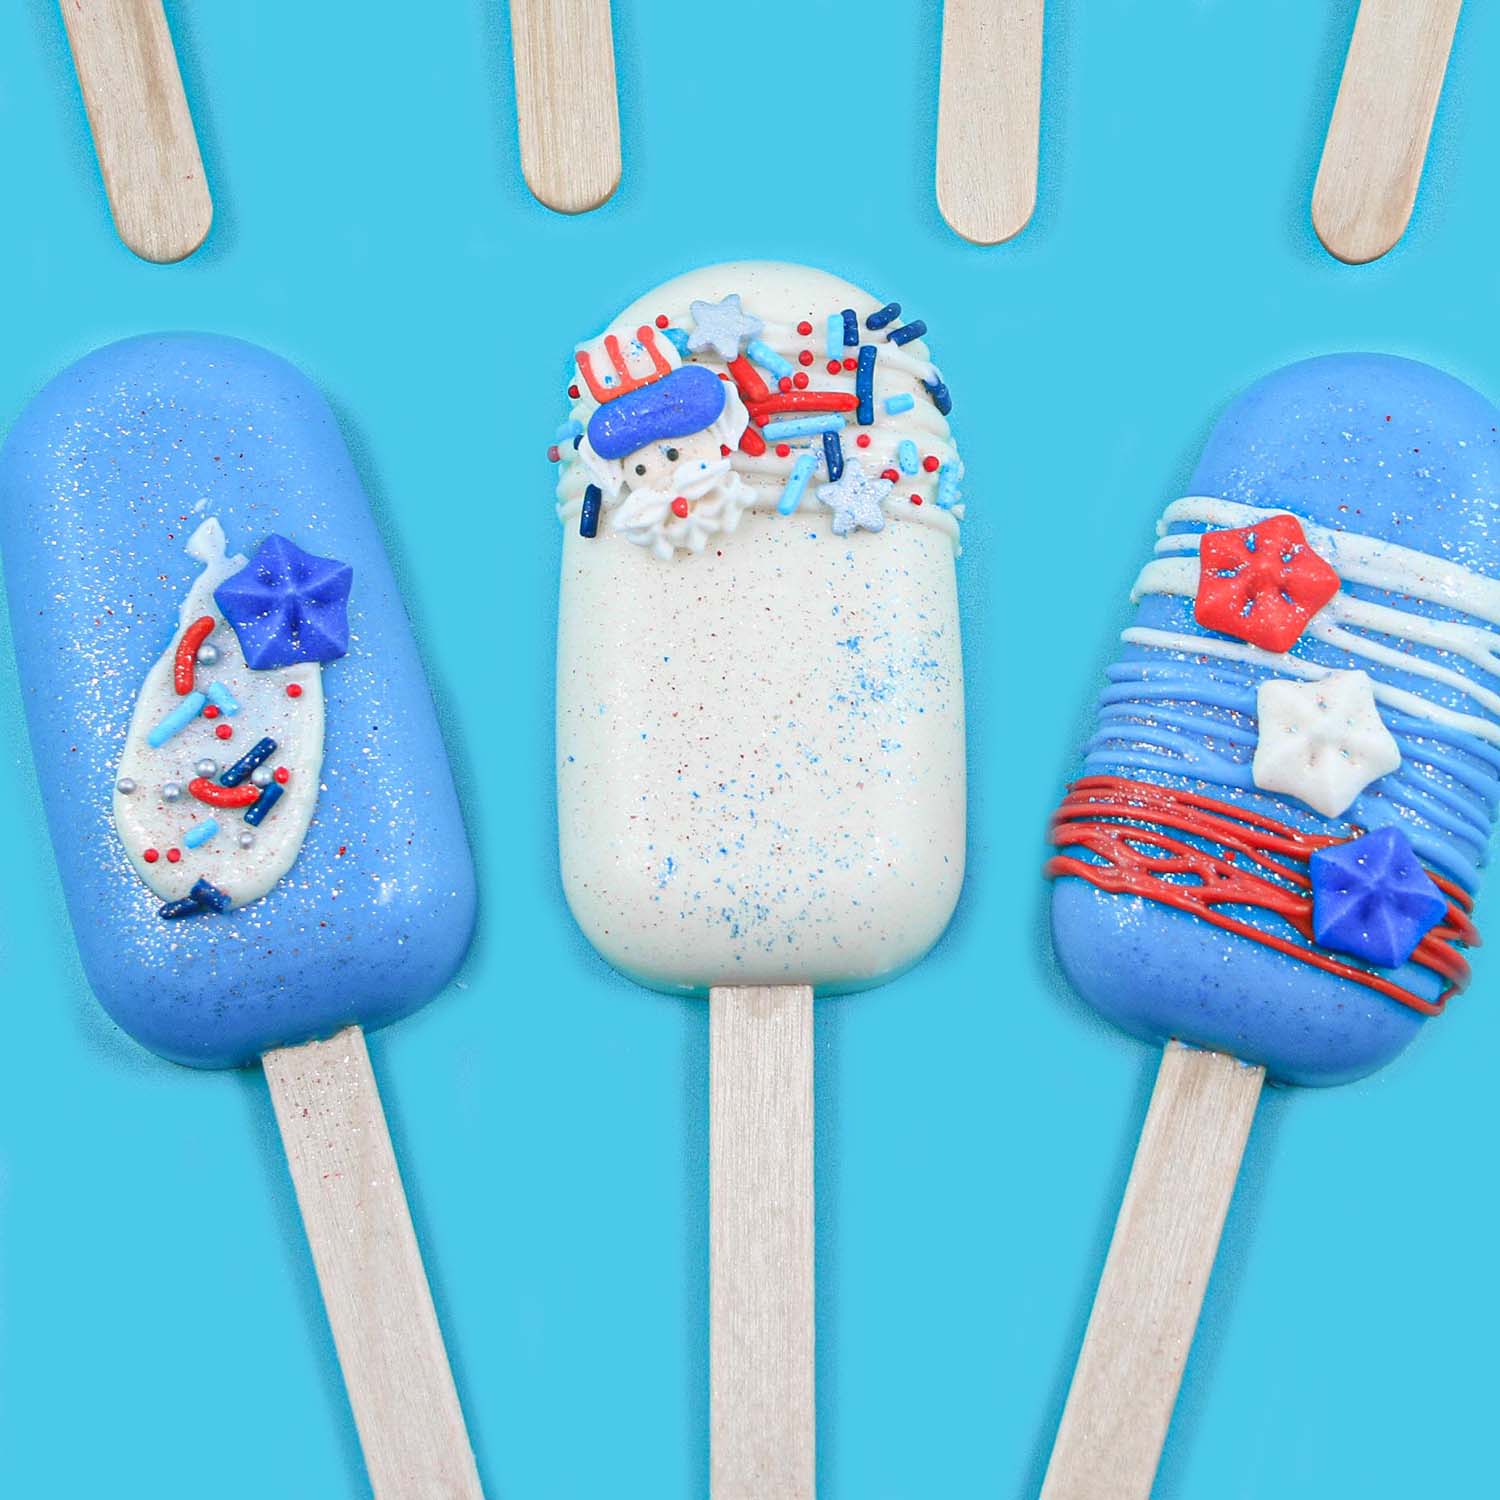 3 cakesicles in blue and white chocolate coating, drizzle, and decorated wiht jimmies, nonpareils, candy stars, patriotic sugar layons and jewel dust